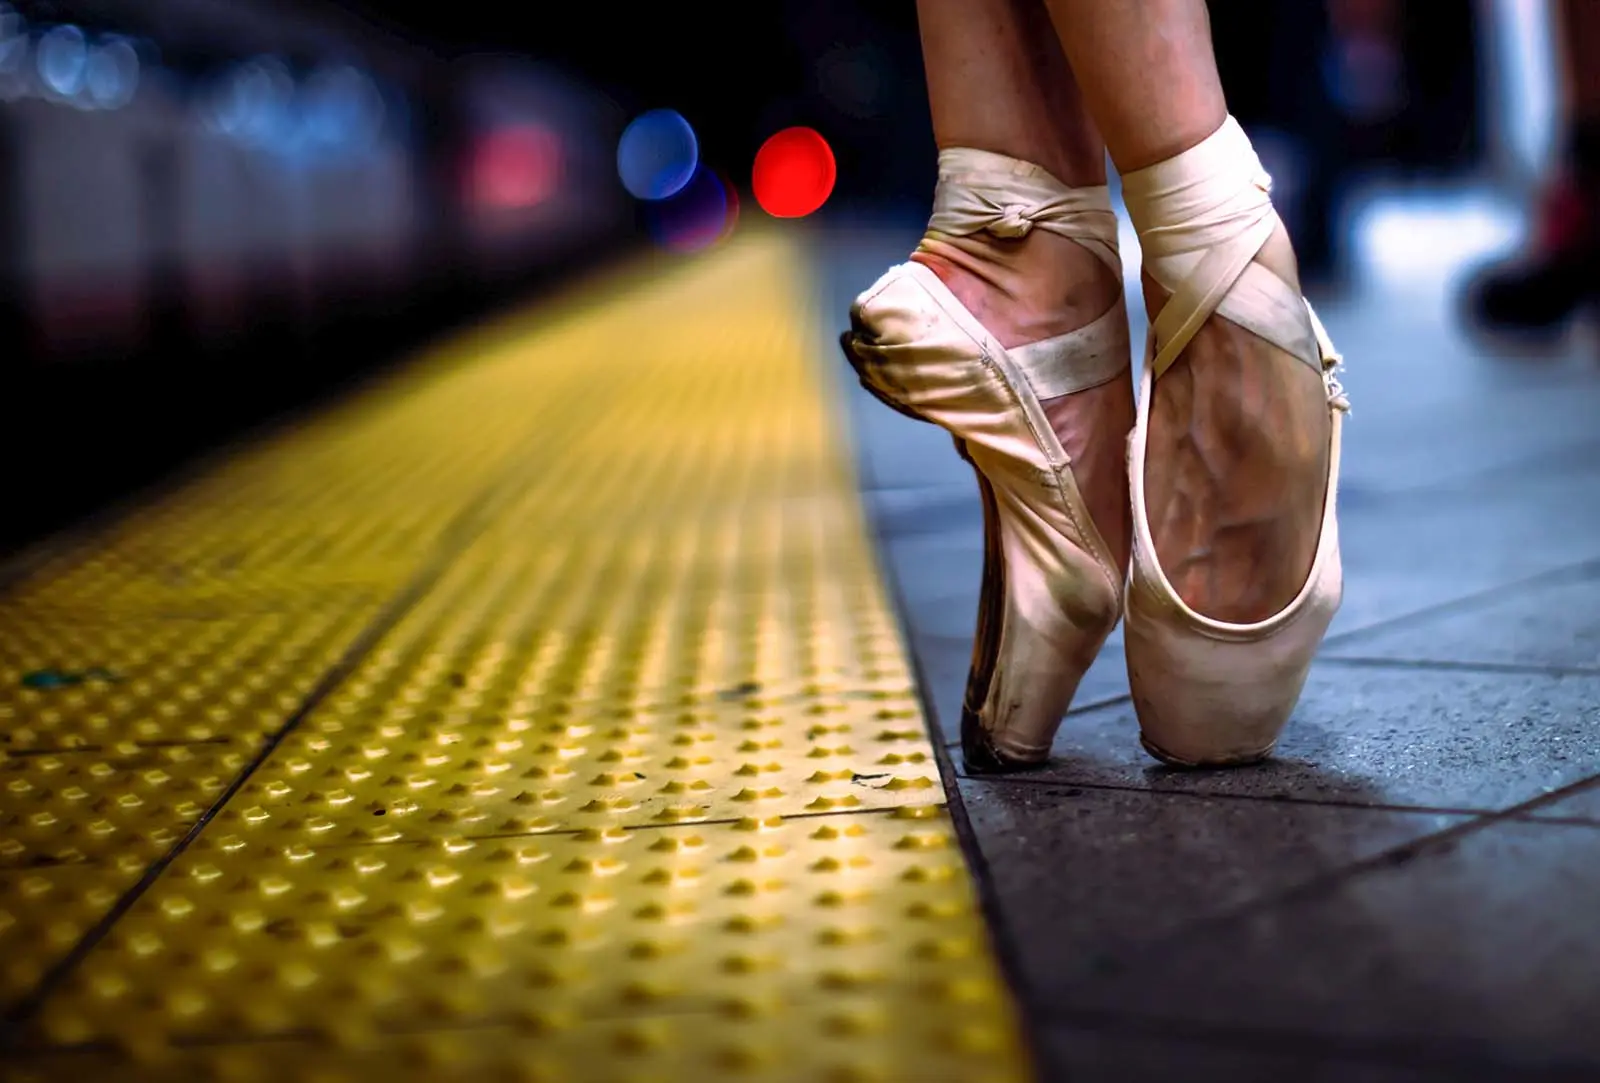 feet of a ballet dancer in a subway station.